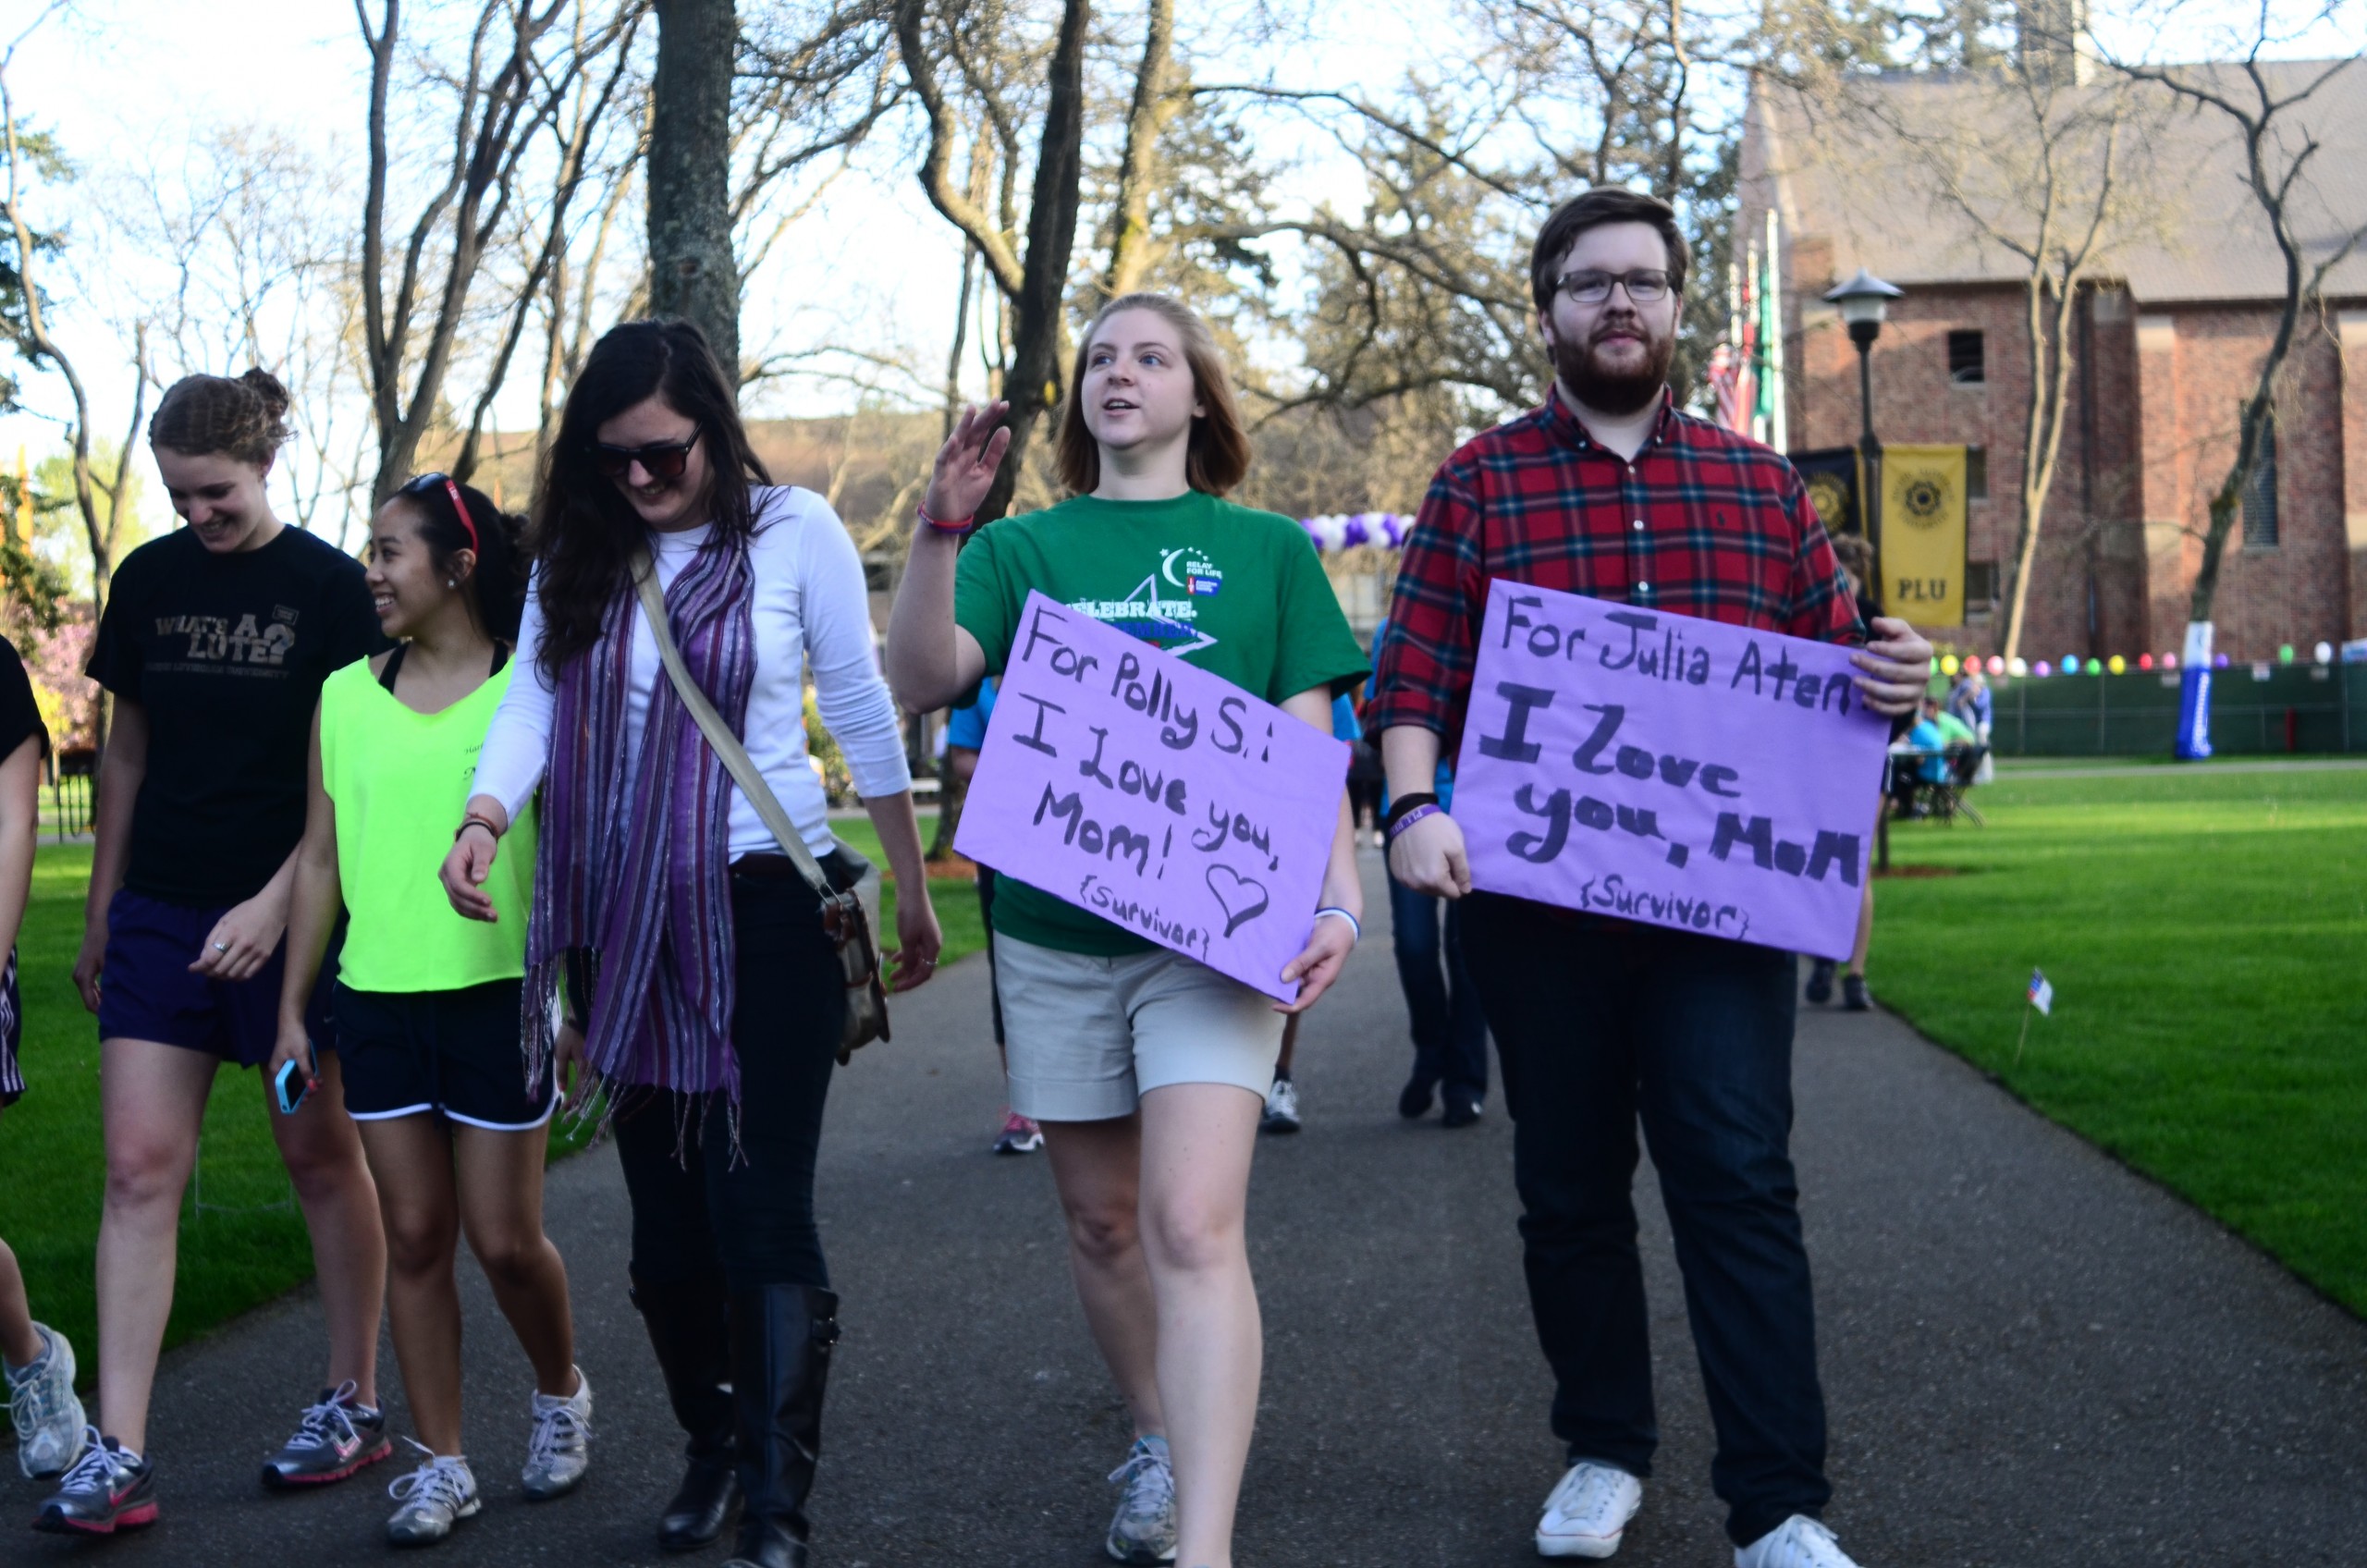 Students walk during a previous Relay for Life at PLU. (Photo: John Froschauer/PLU)